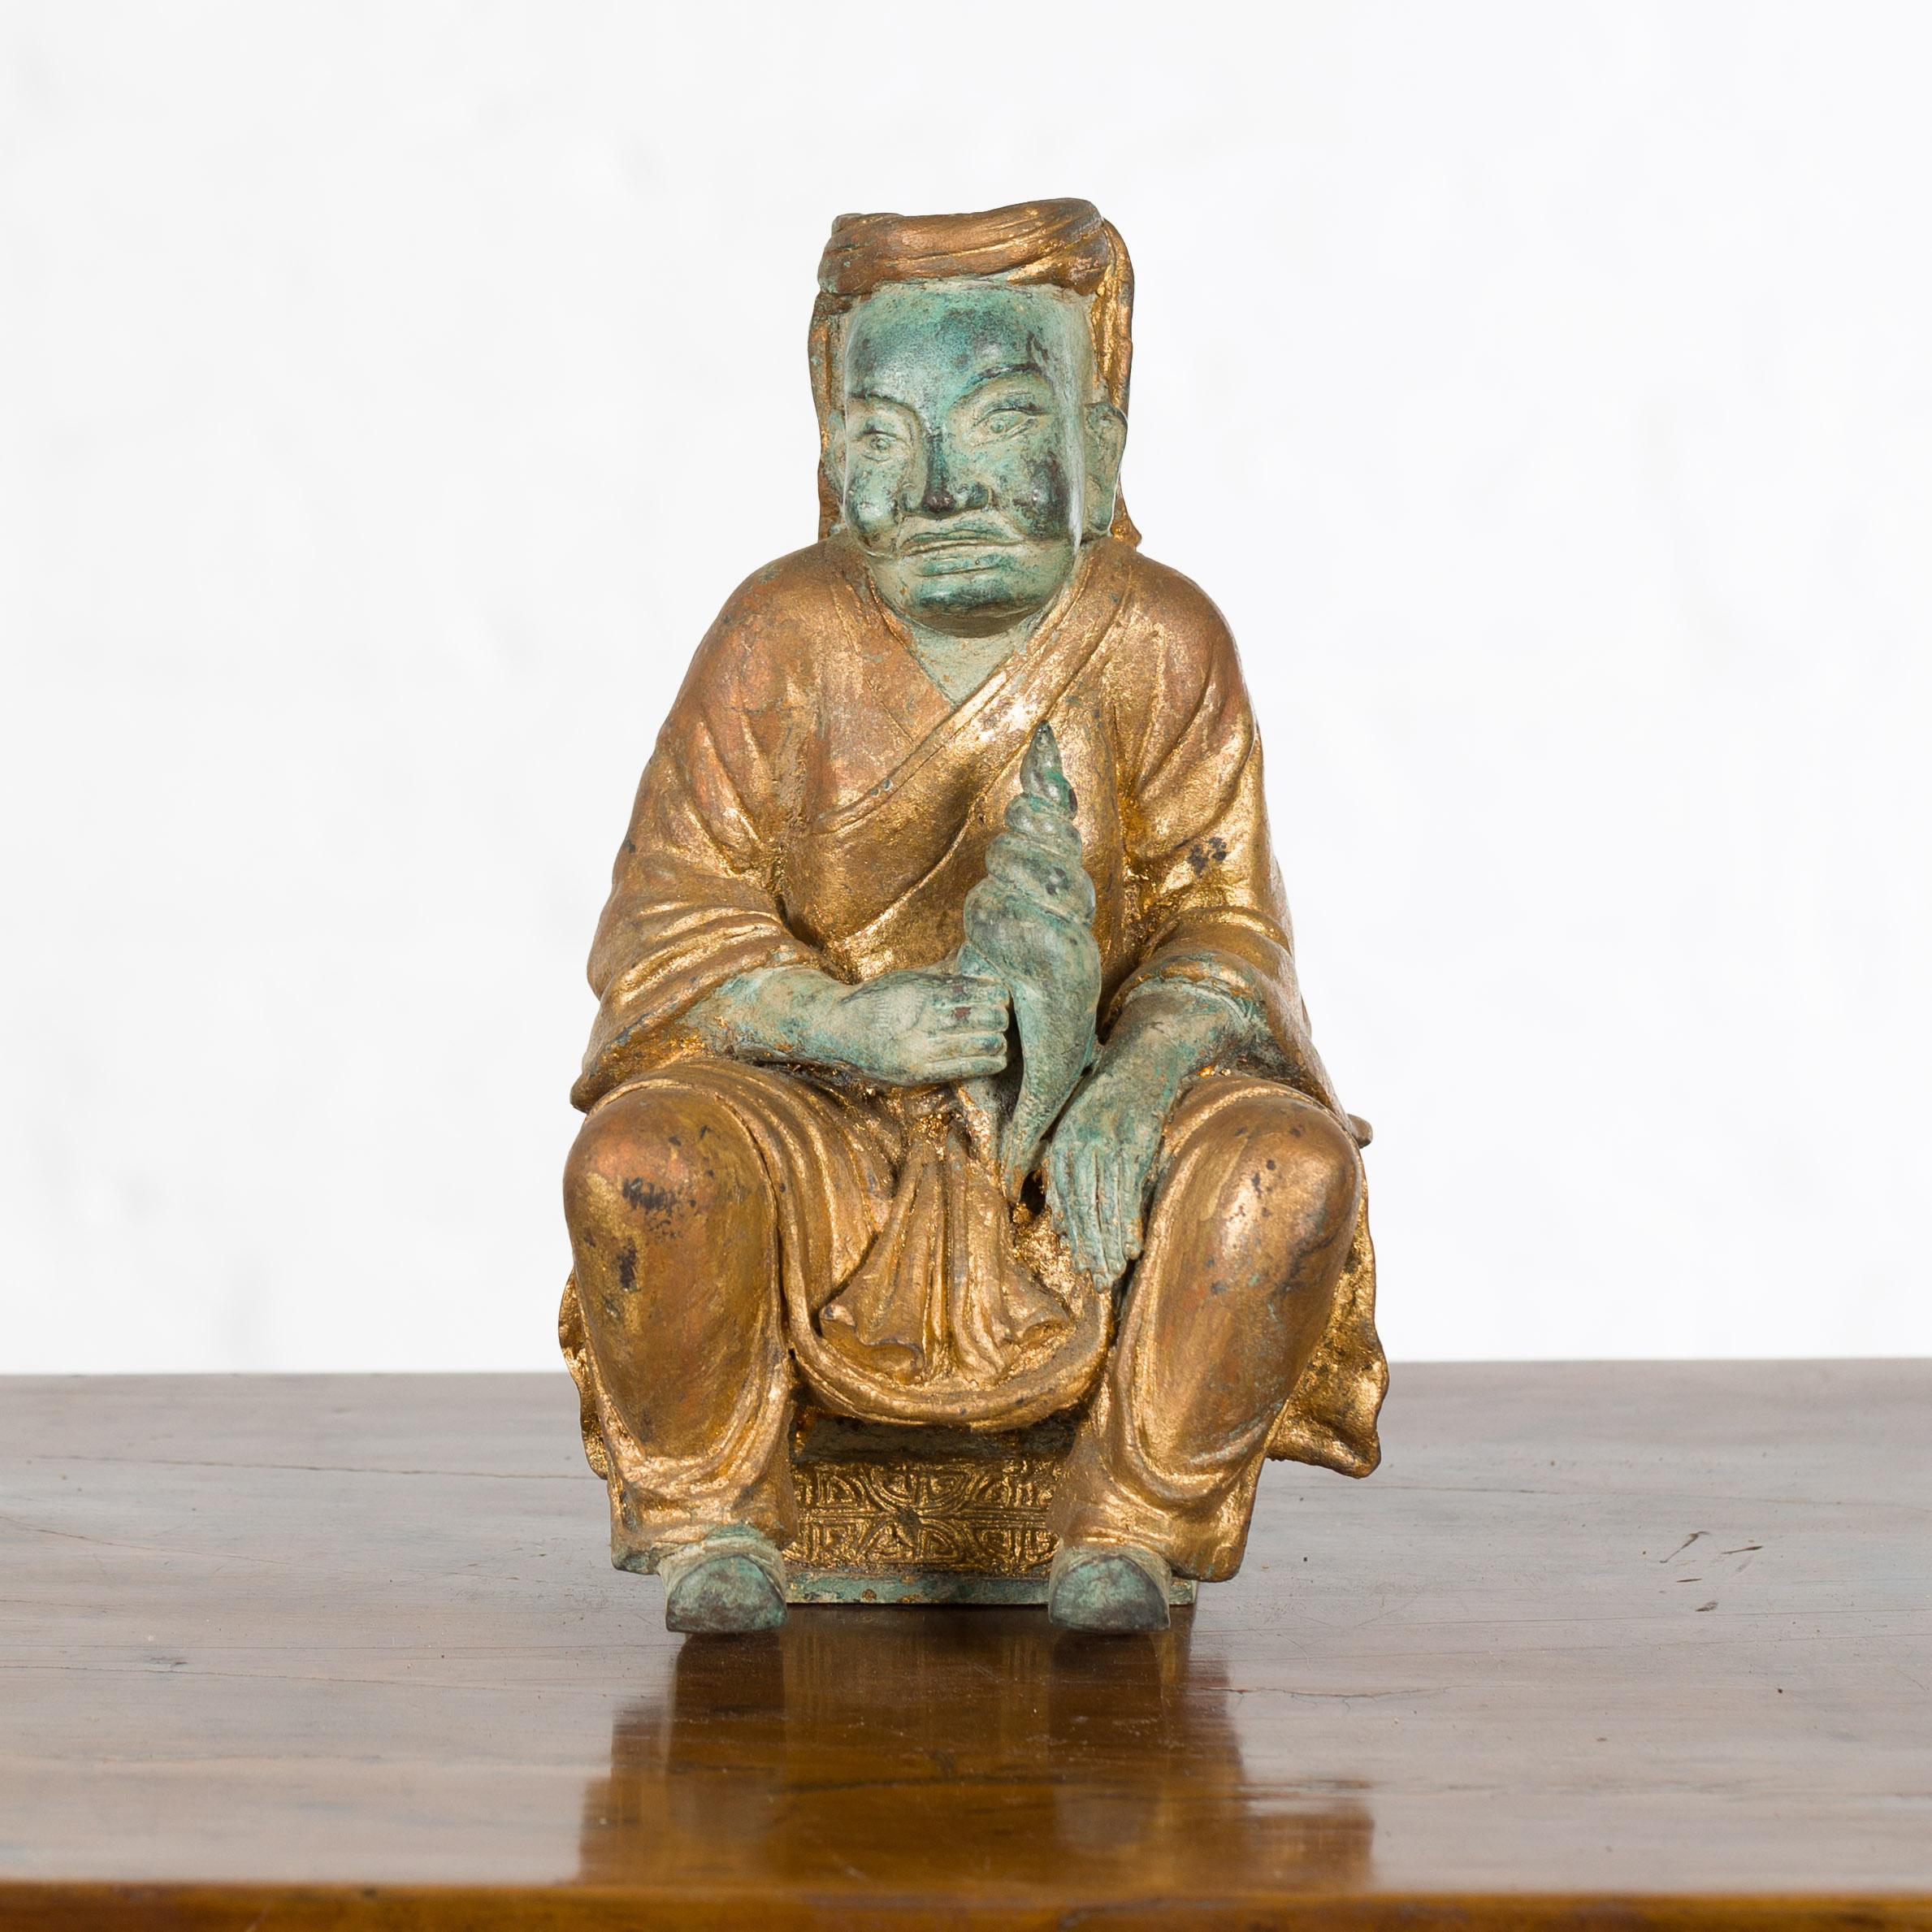 A small Thai vintage seated monk holding a shell from the mid 20th century with verde and gilt bronze finish. Created in Thailand during the mid century period, this petite bronze sculpture features a seated monk holding a conch shell in his right